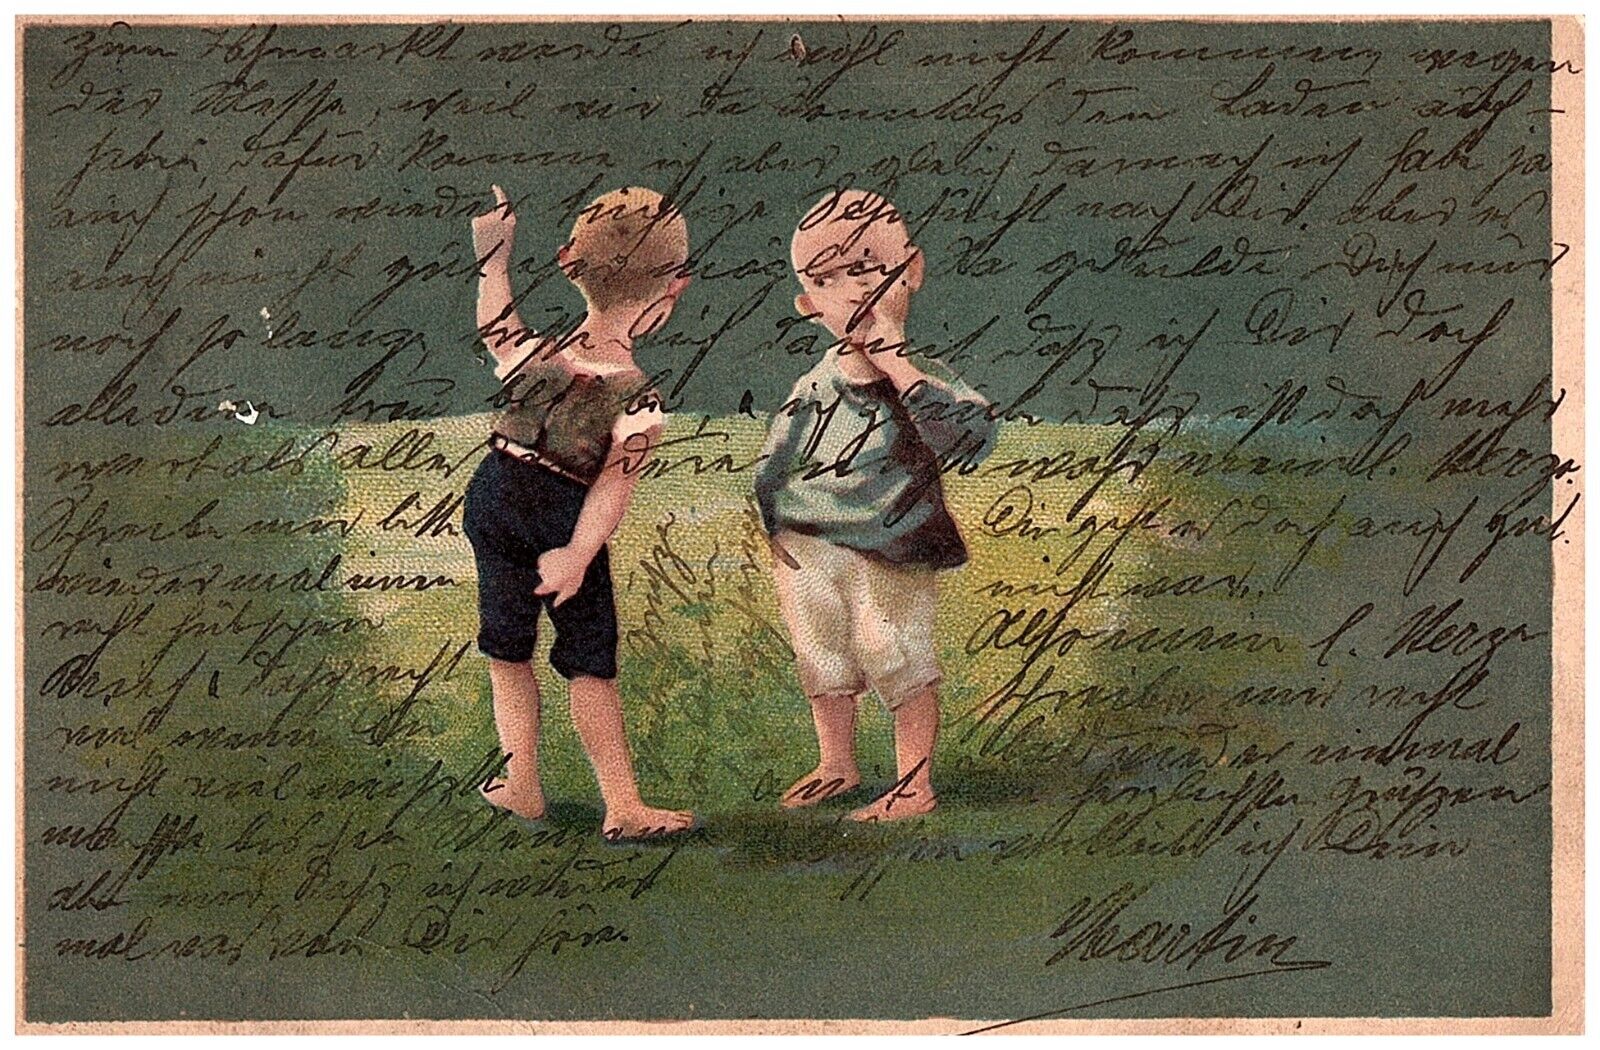 1913 German Second Reich Empire Leipzig Germany Postcard 2 Little Boys Playing